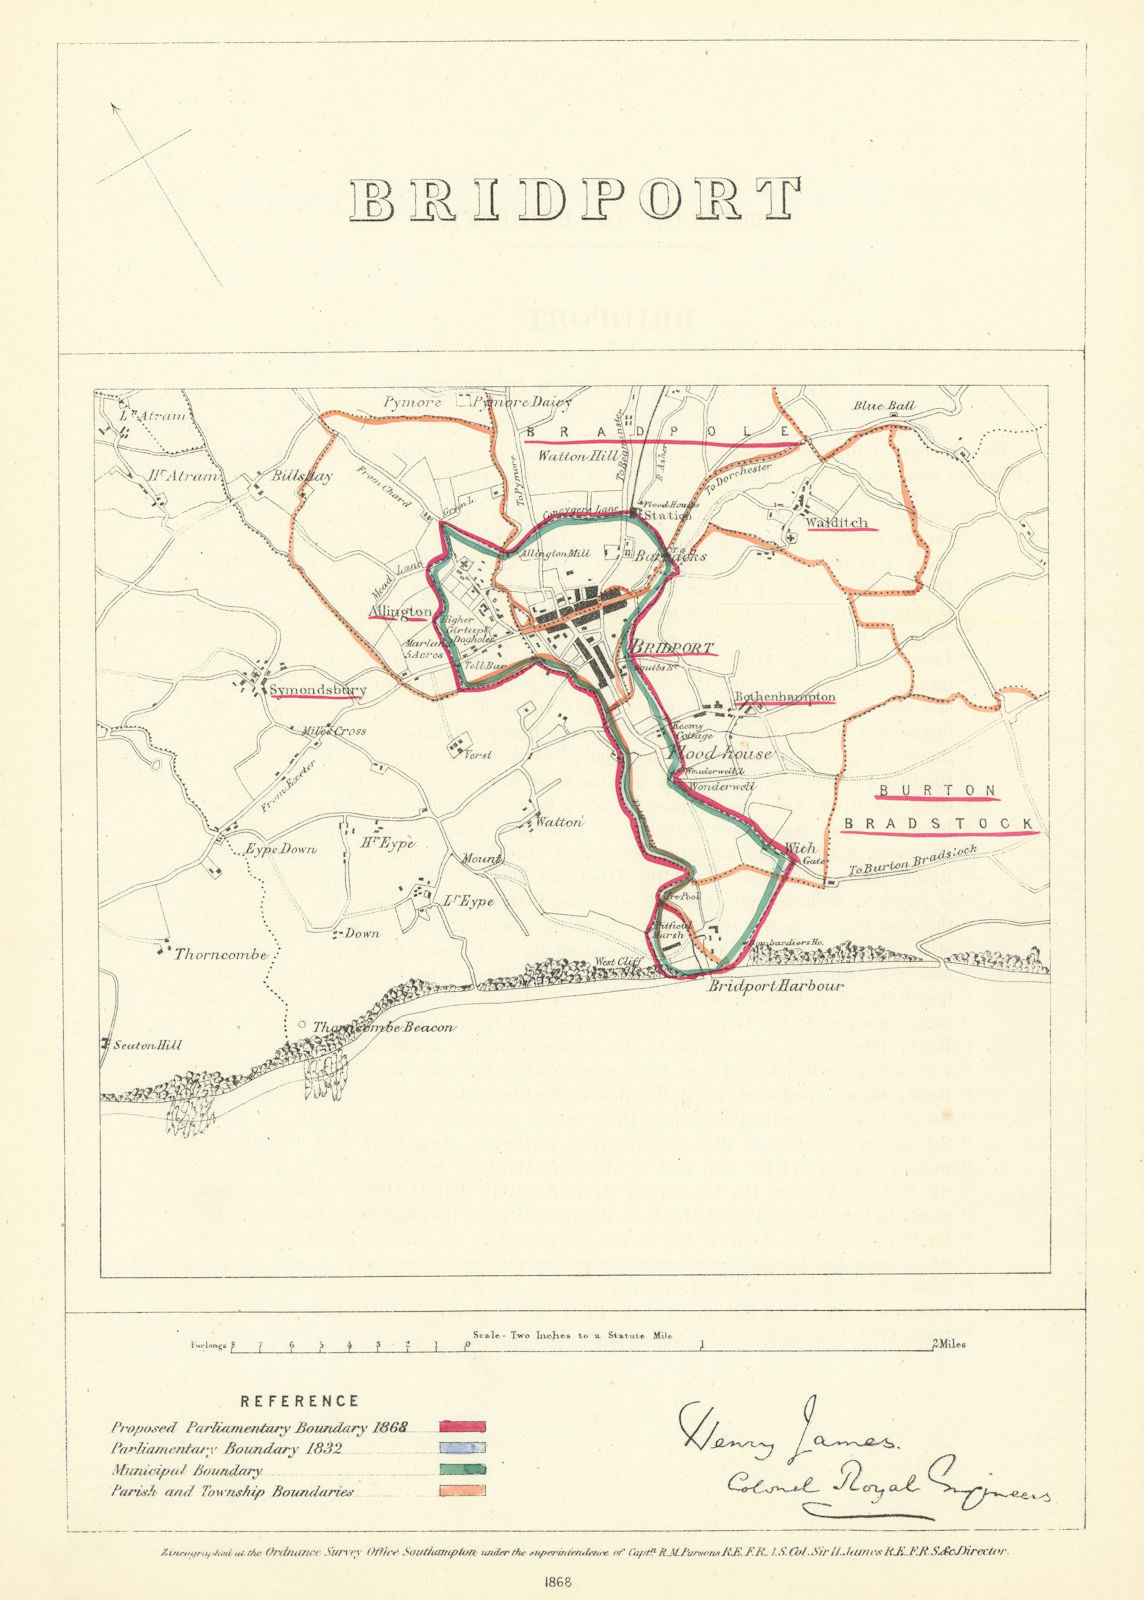 Associate Product Bridport, Dorset. JAMES. Parliamentary Boundary Commission 1868 old map